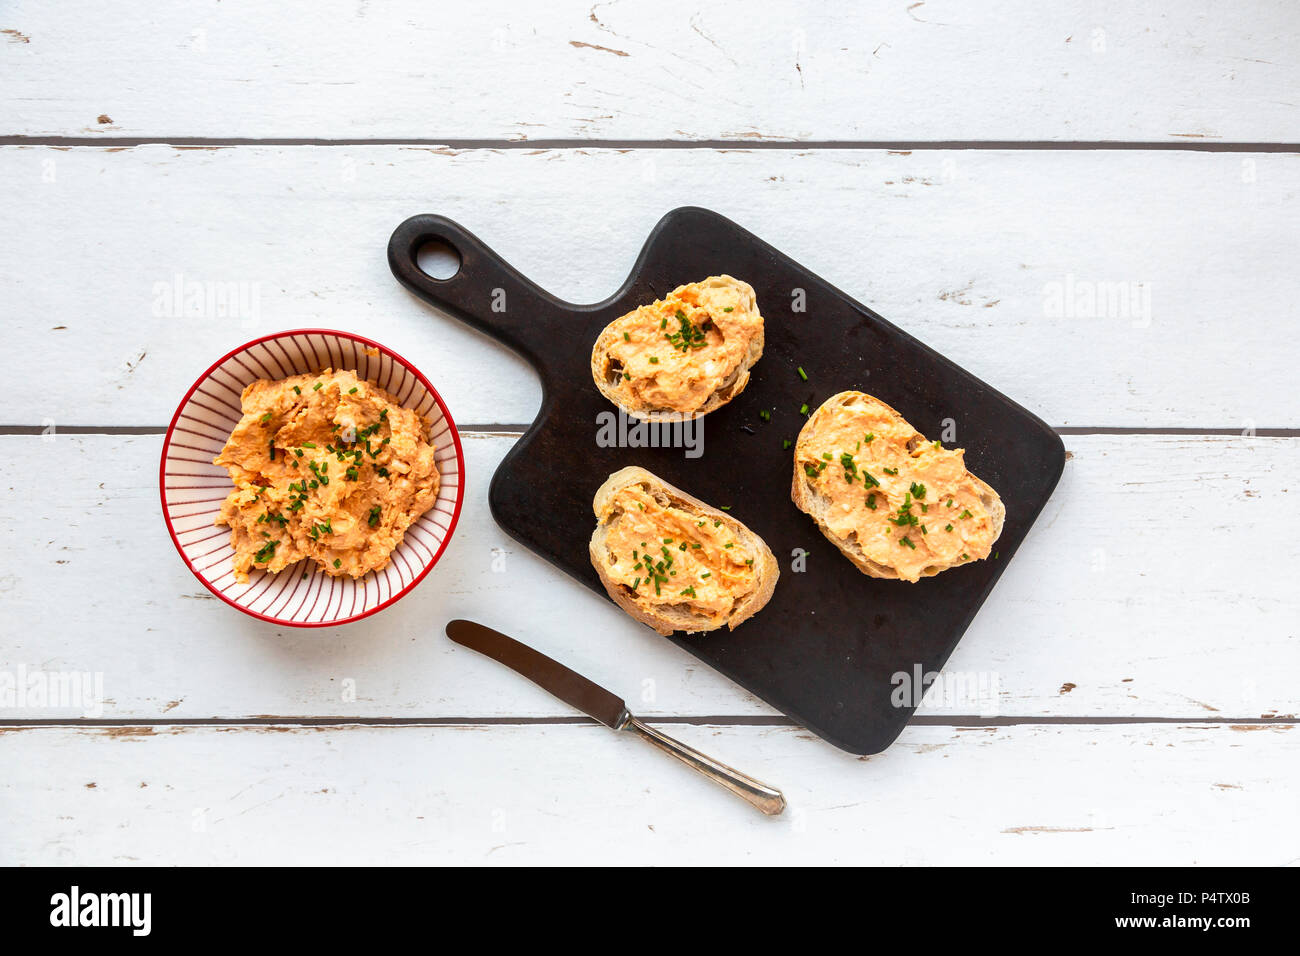 Bread with obazda and chives Stock Photo